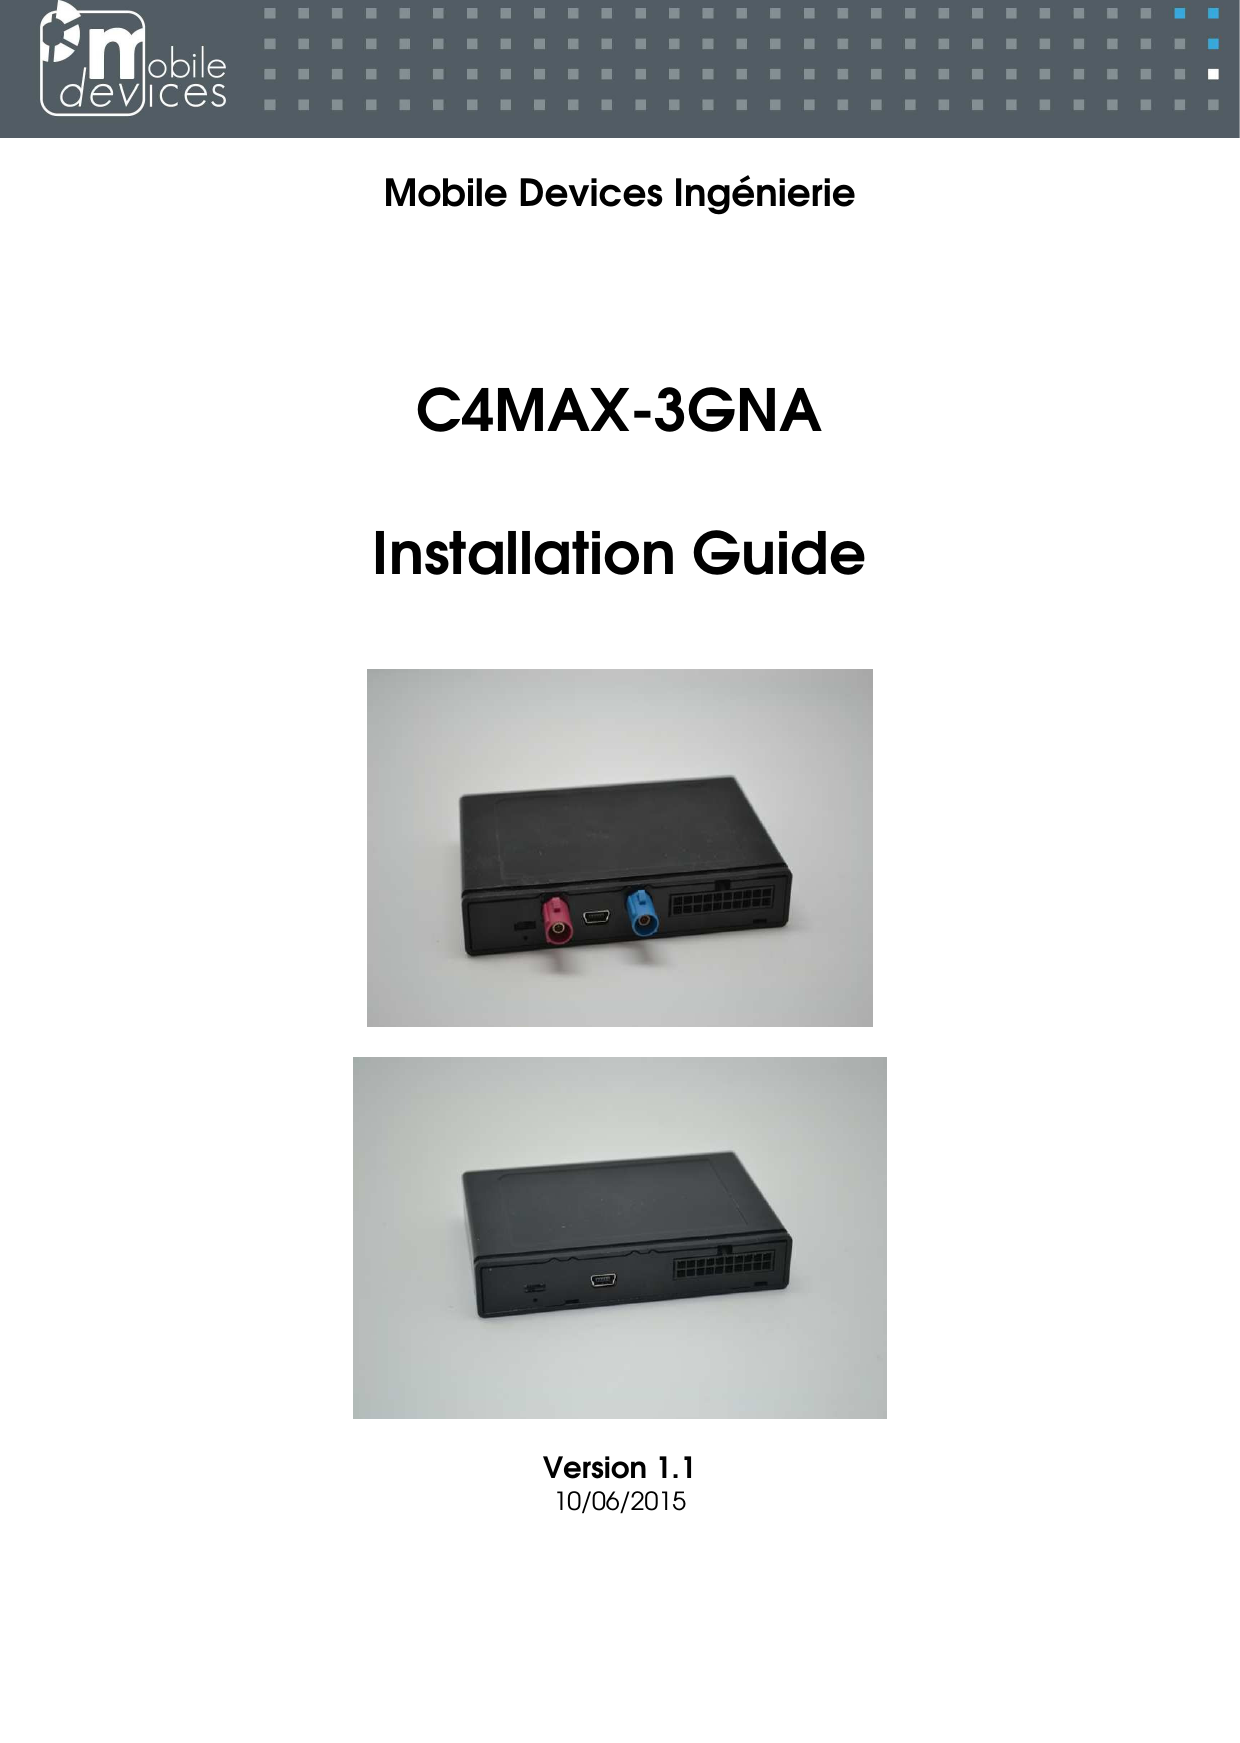   Mobile Devices Ingénierie      C4MAX-3GNA   Installation Guide       Version 1.1 10/06/2015 